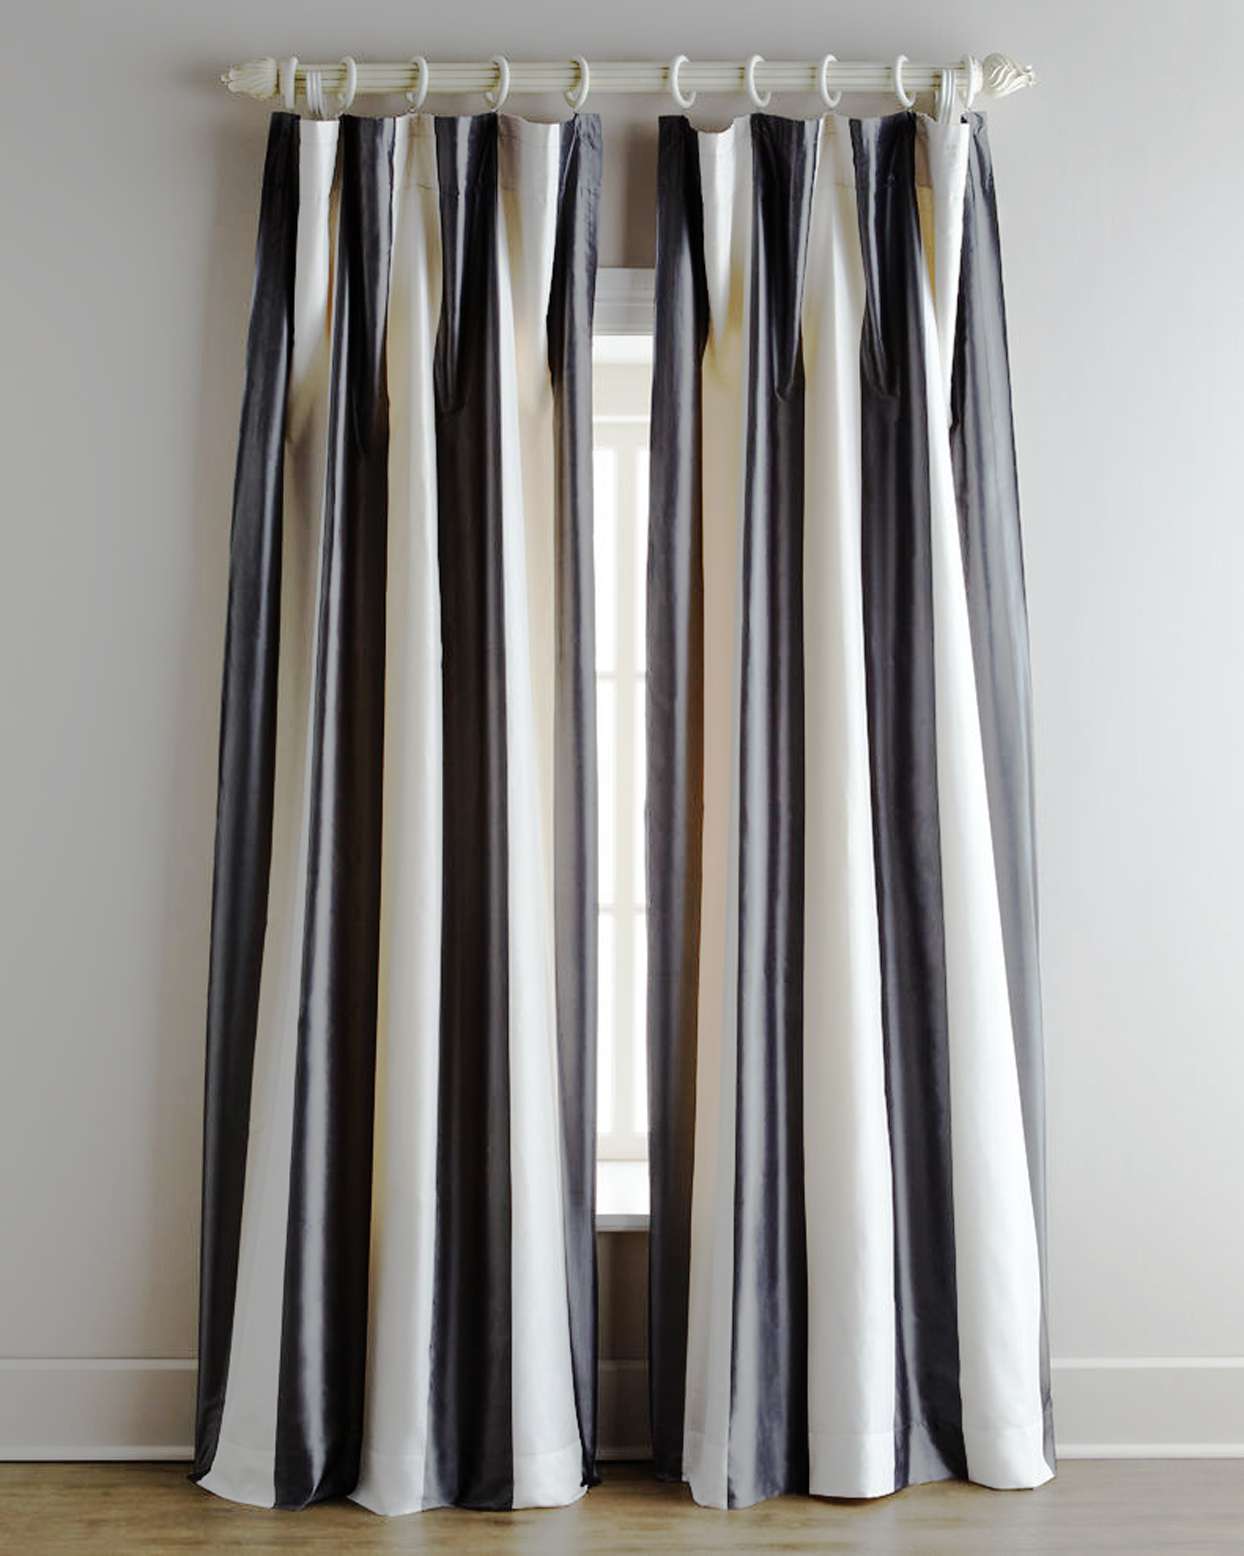 Long living room curtains